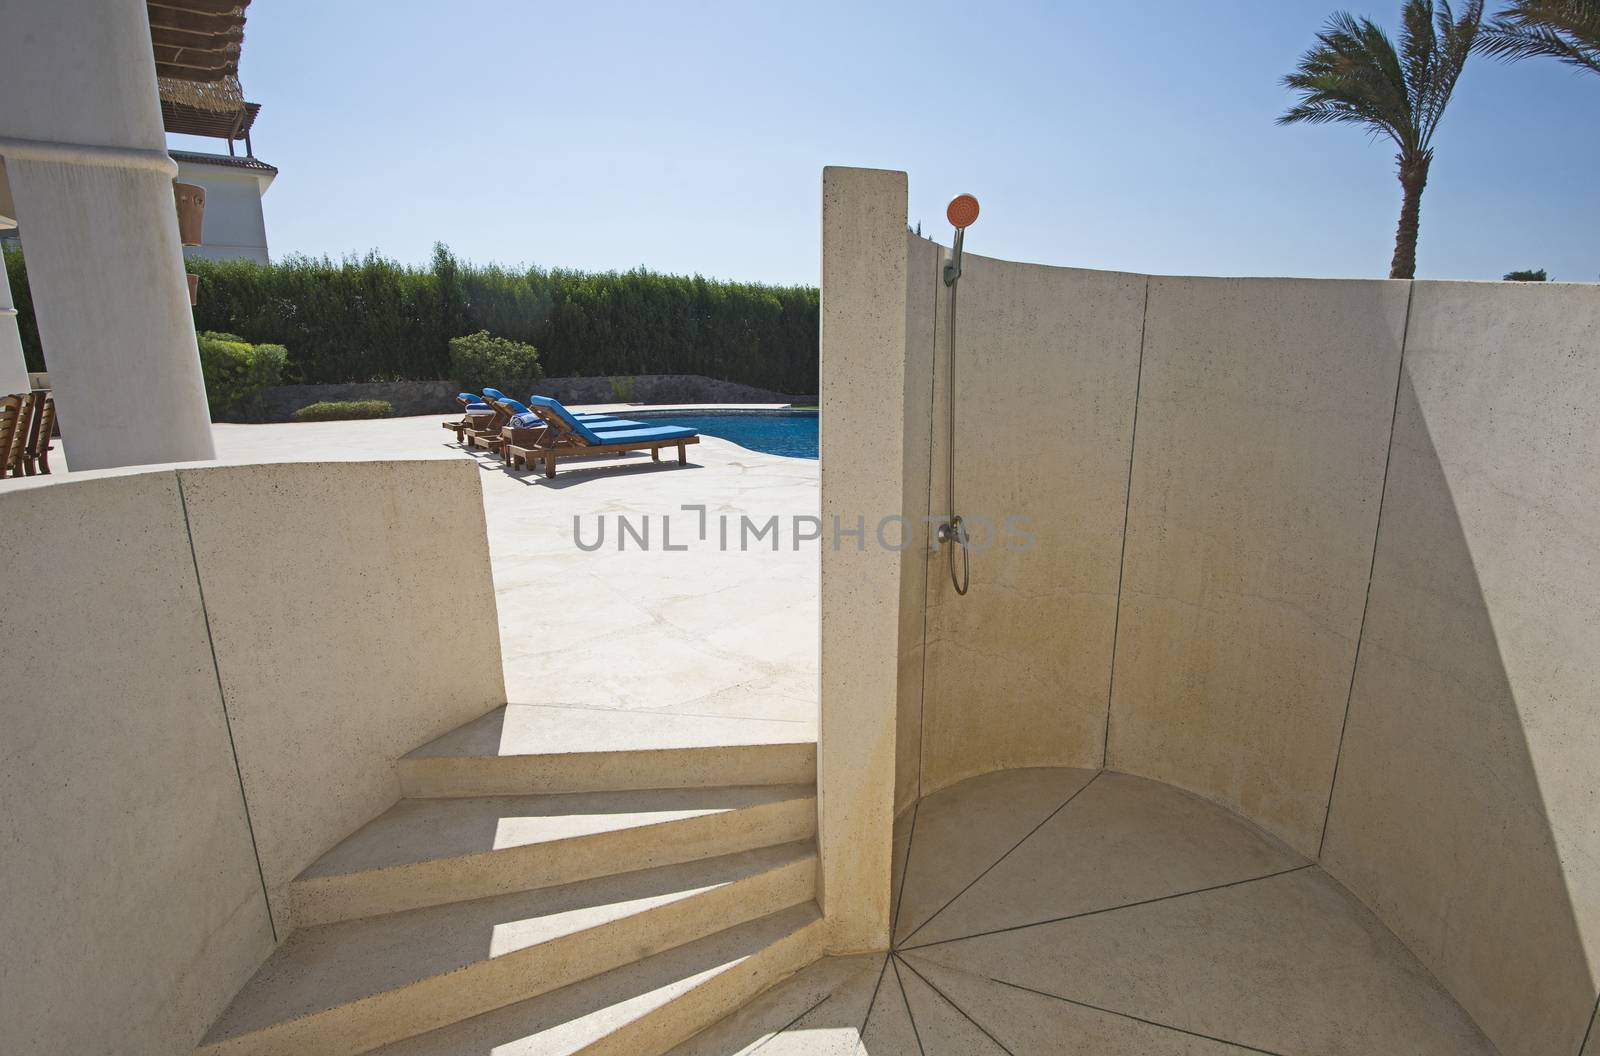 Luxury villa show home in tropical summer holiday resort with swimming pool and outdoor shower